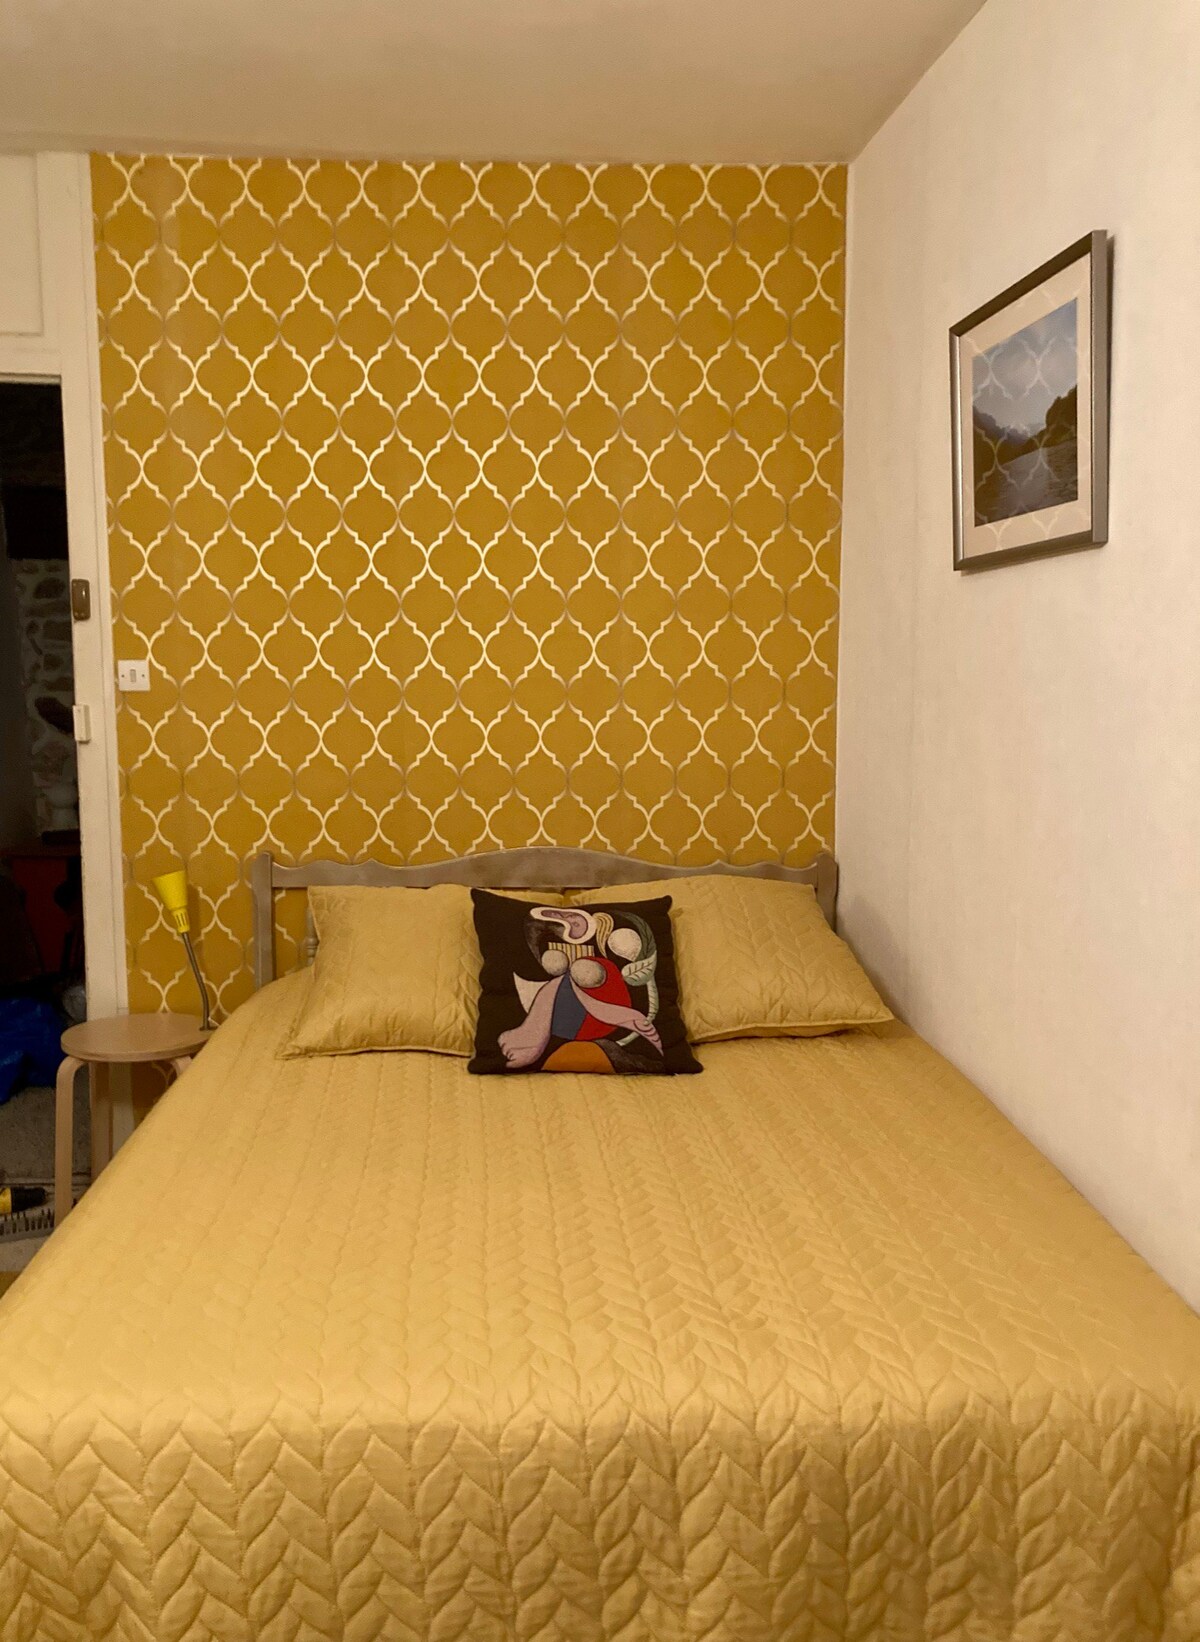 Charming room in the center of Vercors